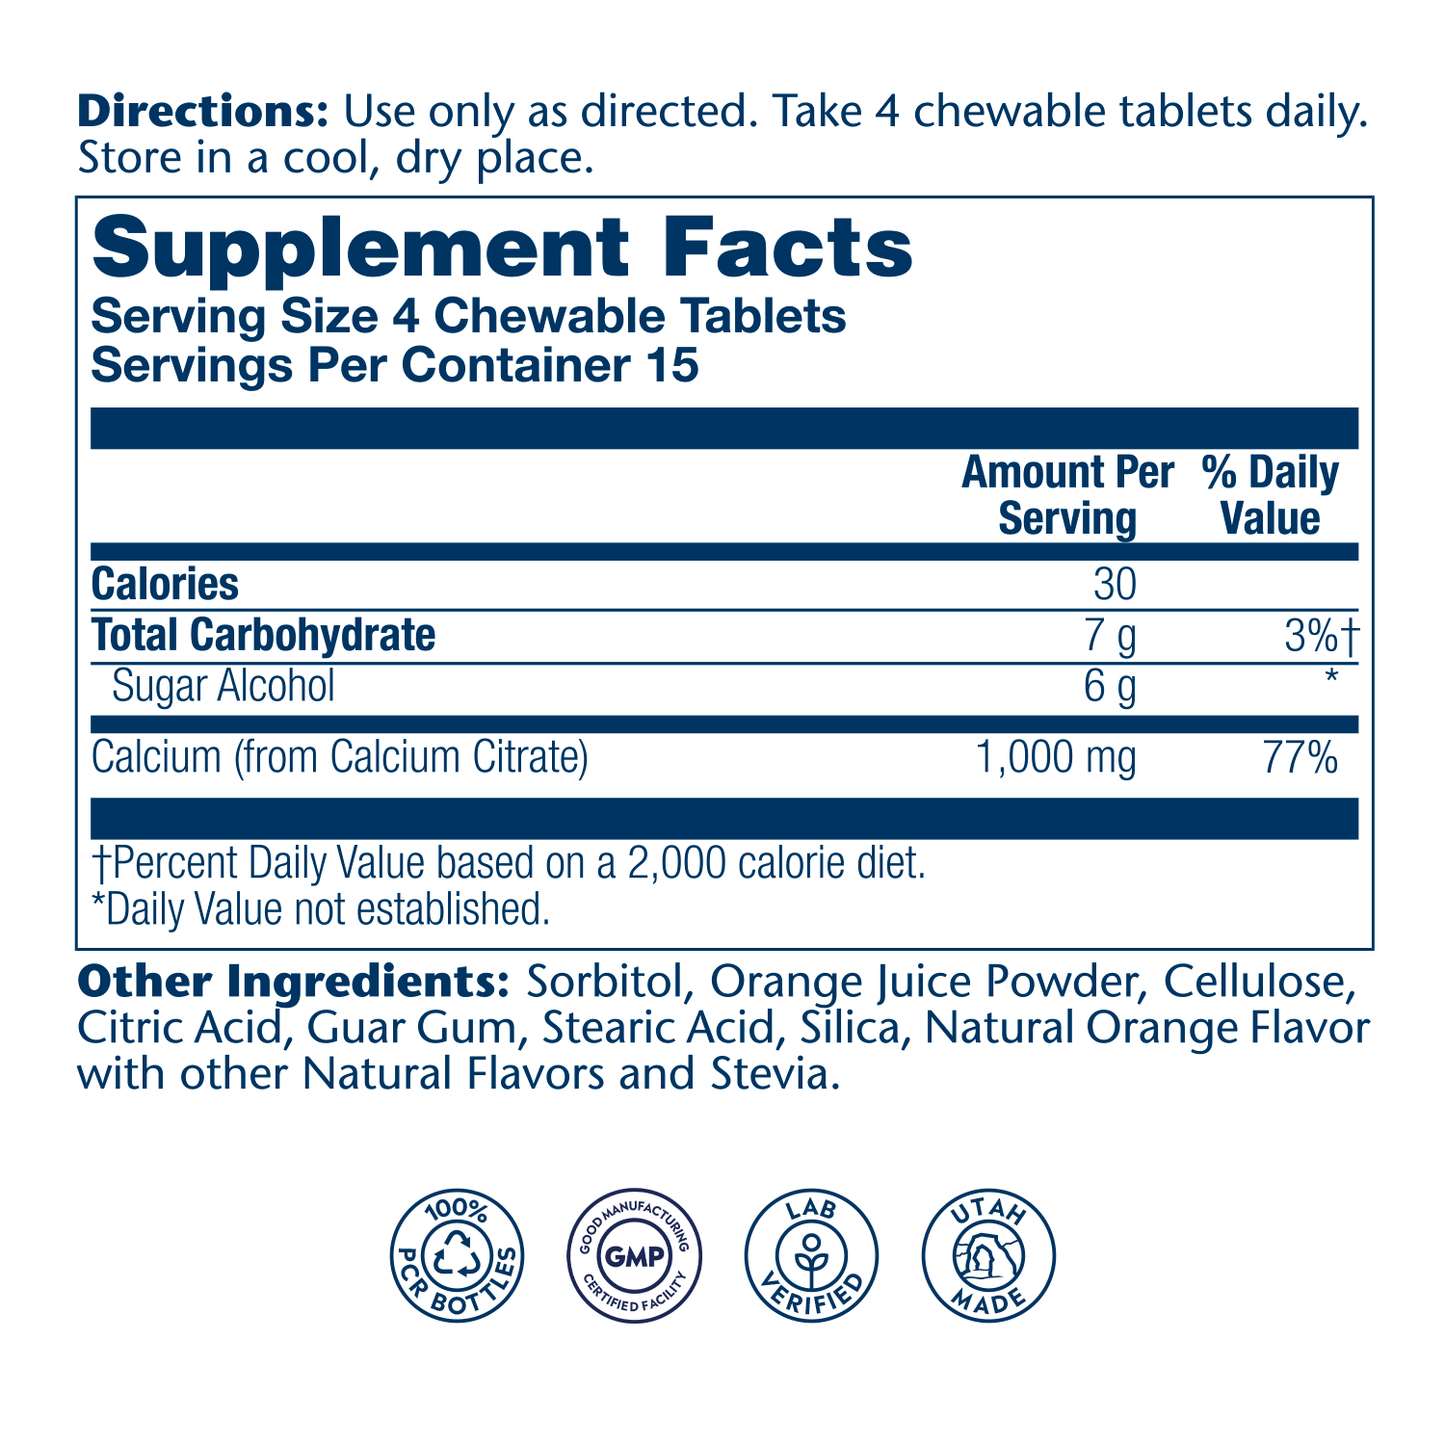 Solaray Calcium Citrate 1000 mg, Natural Orange Flavor Chelated Calcium Supplement for Bone Strength, Teeth, Nerve, Muscle, and Heart Function Support, 60-Day Guarantee, 15 Servings, 60 Chewables